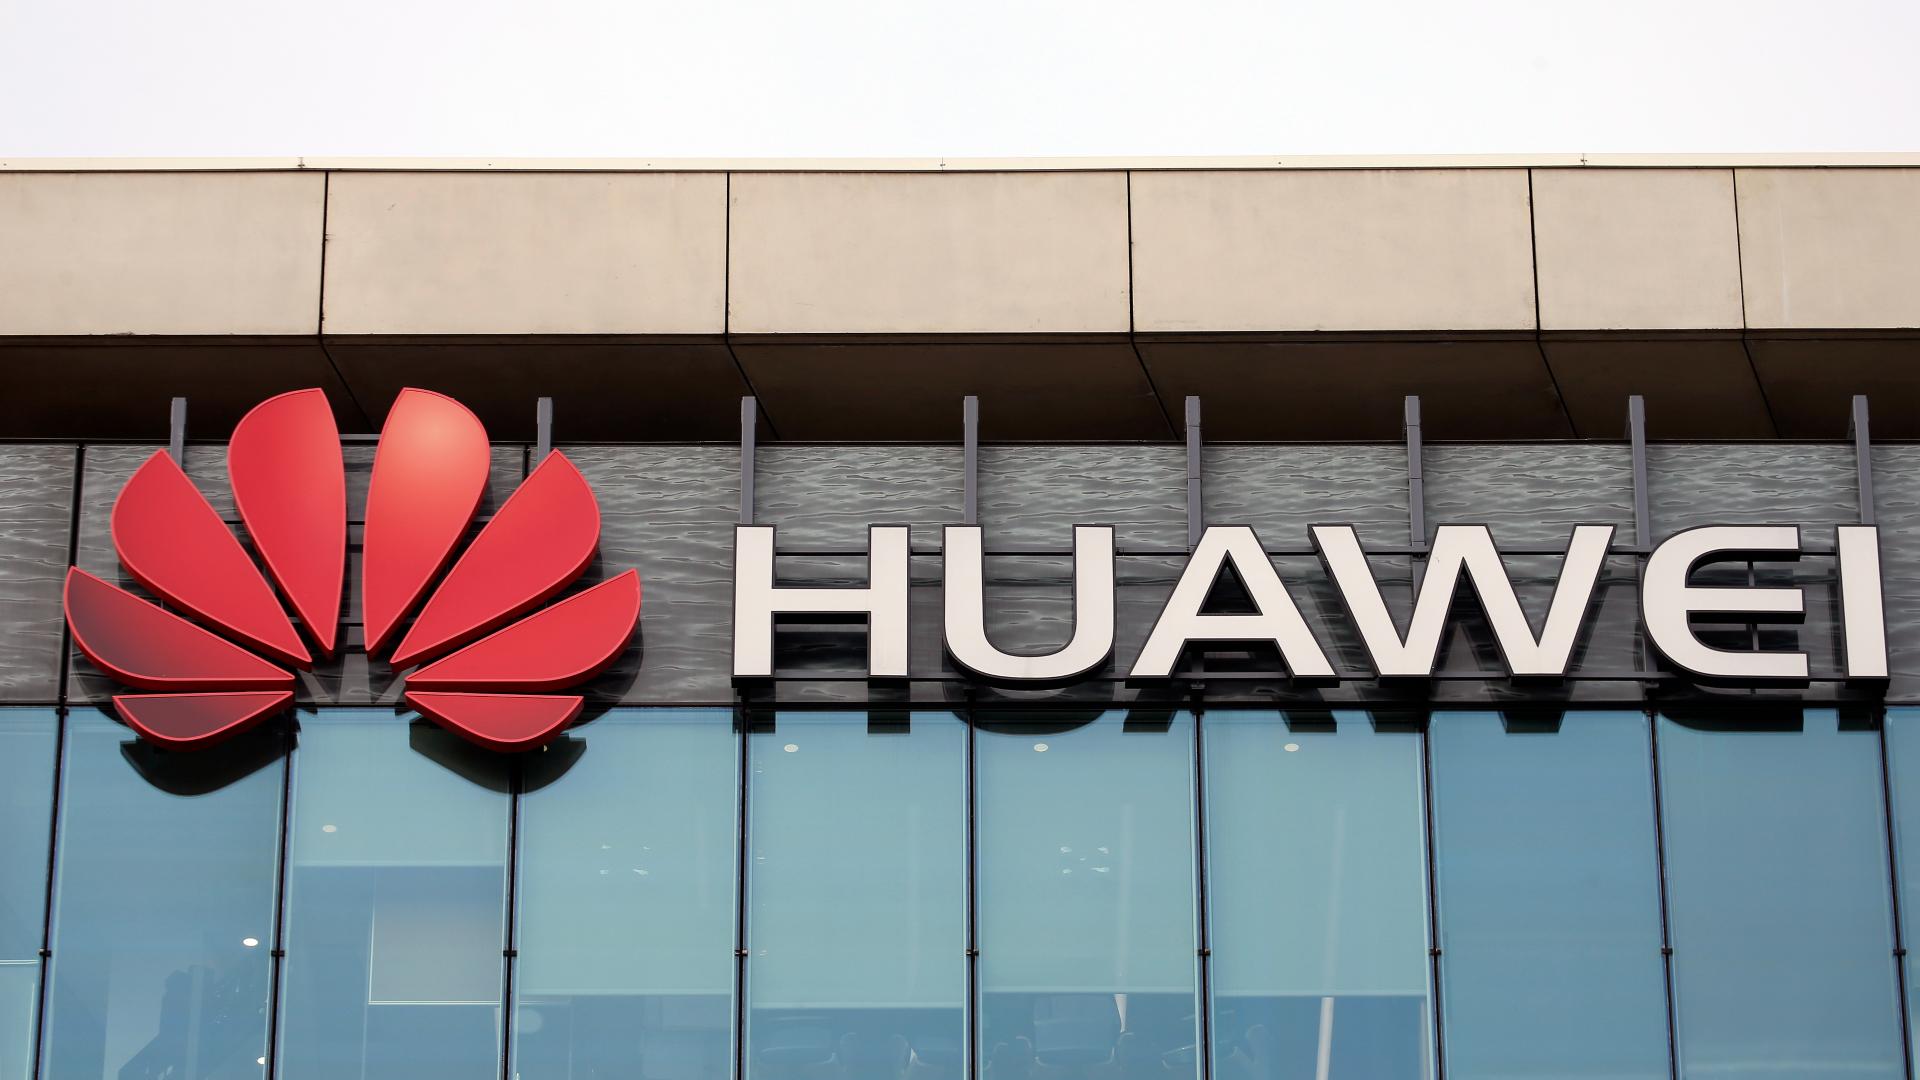 Egypt seeks cooperation with Huawei for smart grid transformation - CGTN